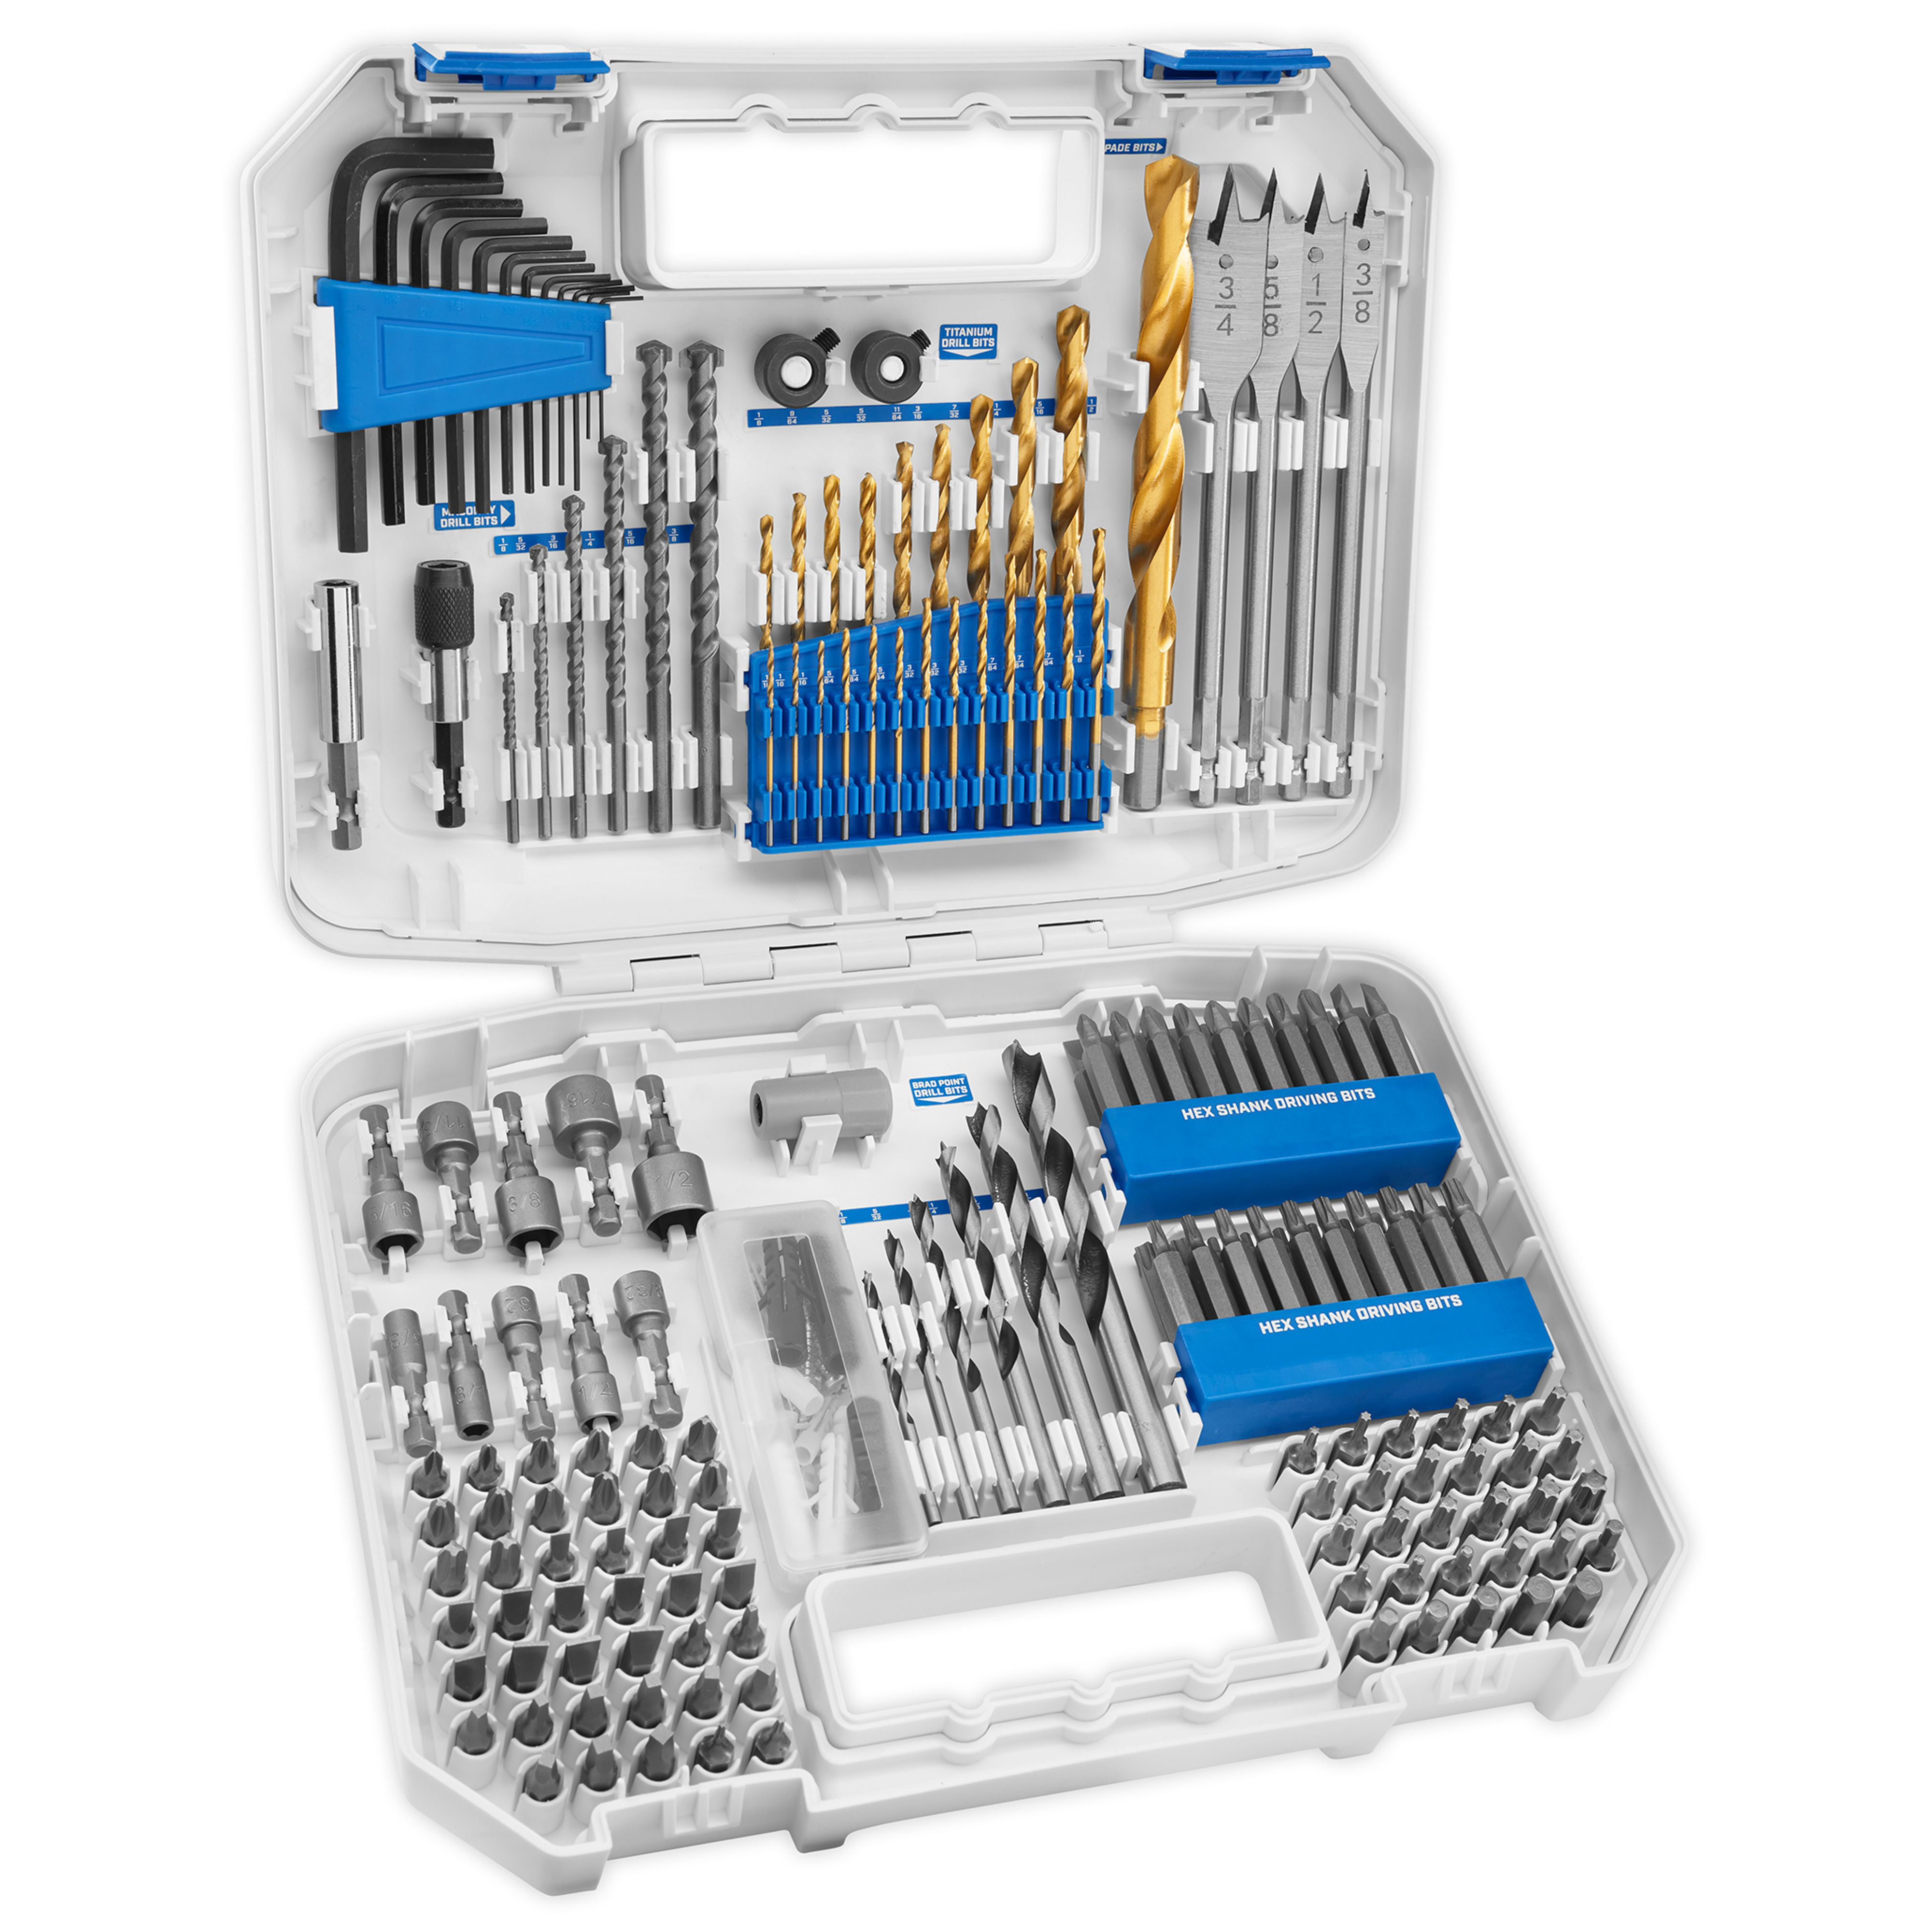 HART 200-Piece Assorted Drill and Drive Bit Set with Storage Case $26